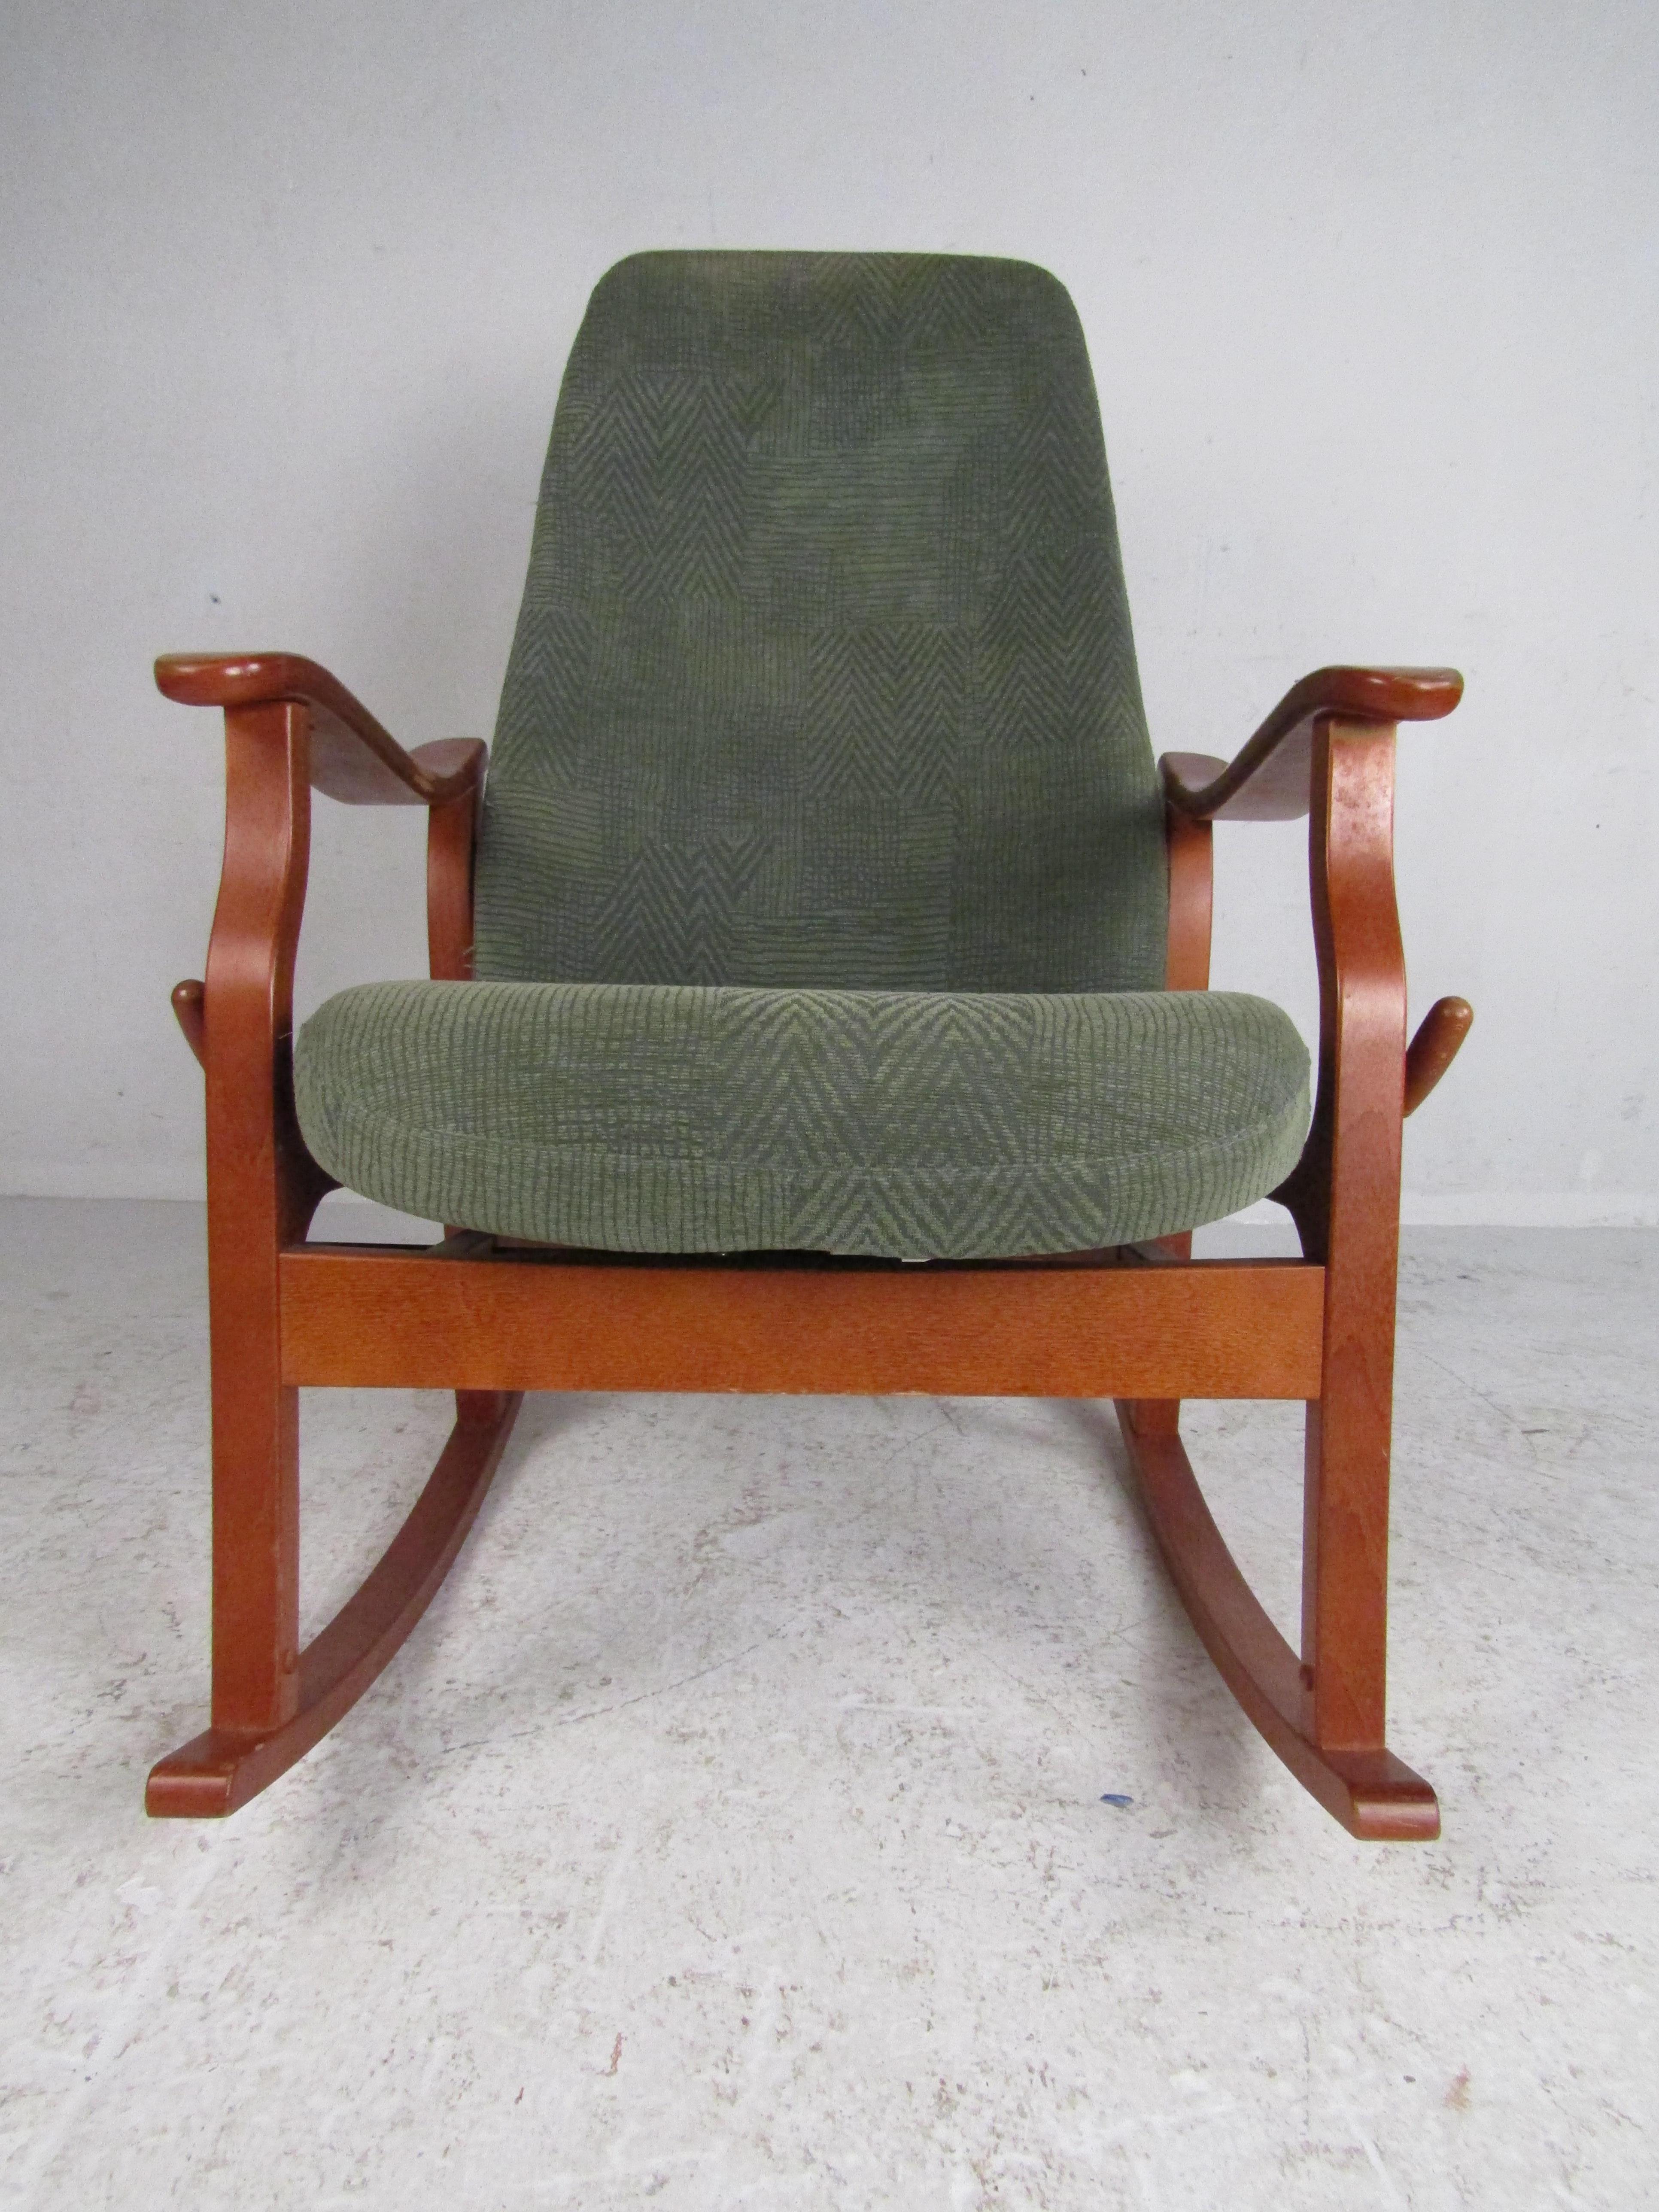 This stunning vintage modern rocking chair features a sculpted teak frame, overstuffed seats covered in green upholstery, and an adjustable lever on the right side. This impressive vintage modern rocker makes the perfect addition to any seating